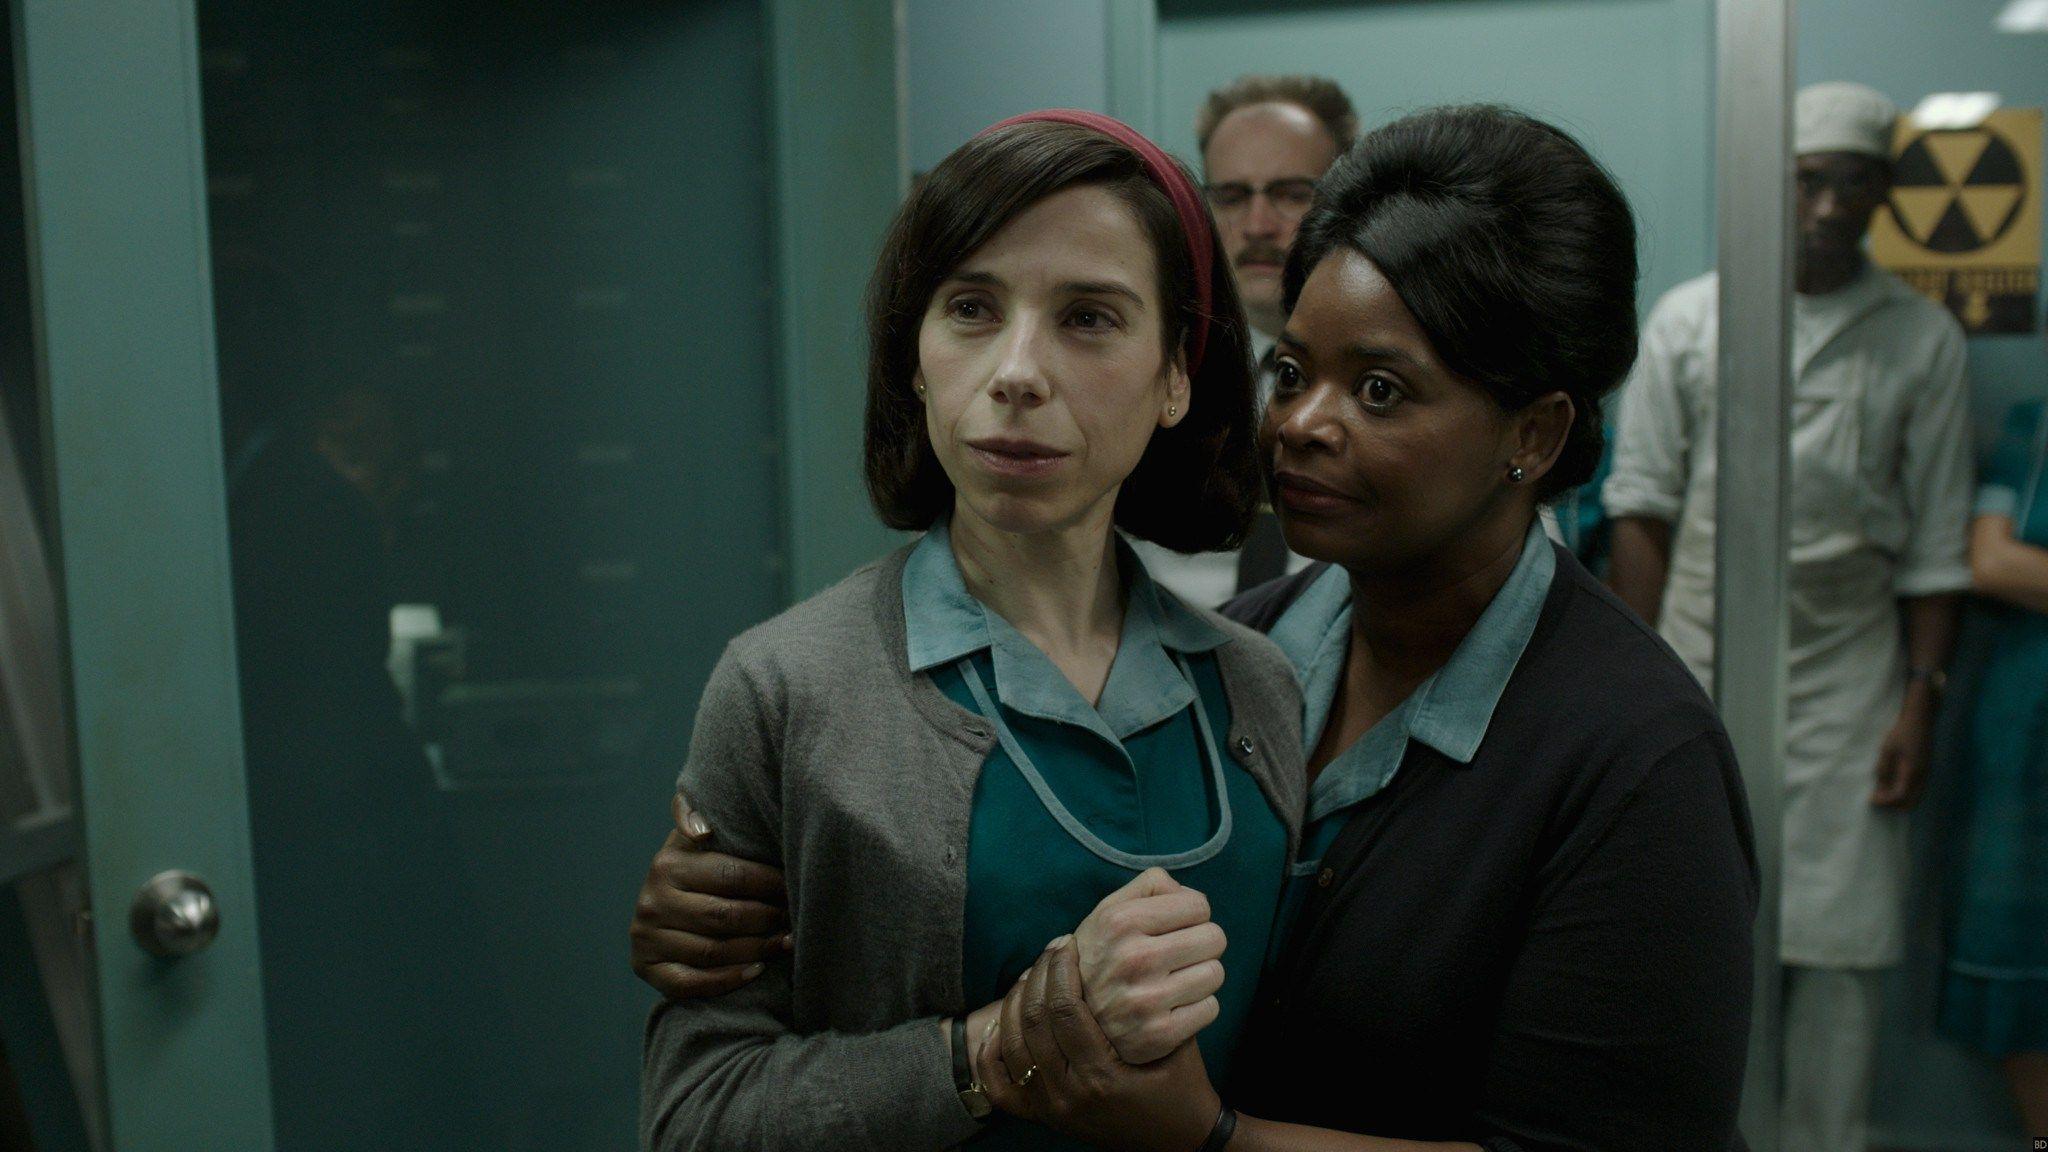 New Image from Guillermo del Toro's 'The Shape of Water'